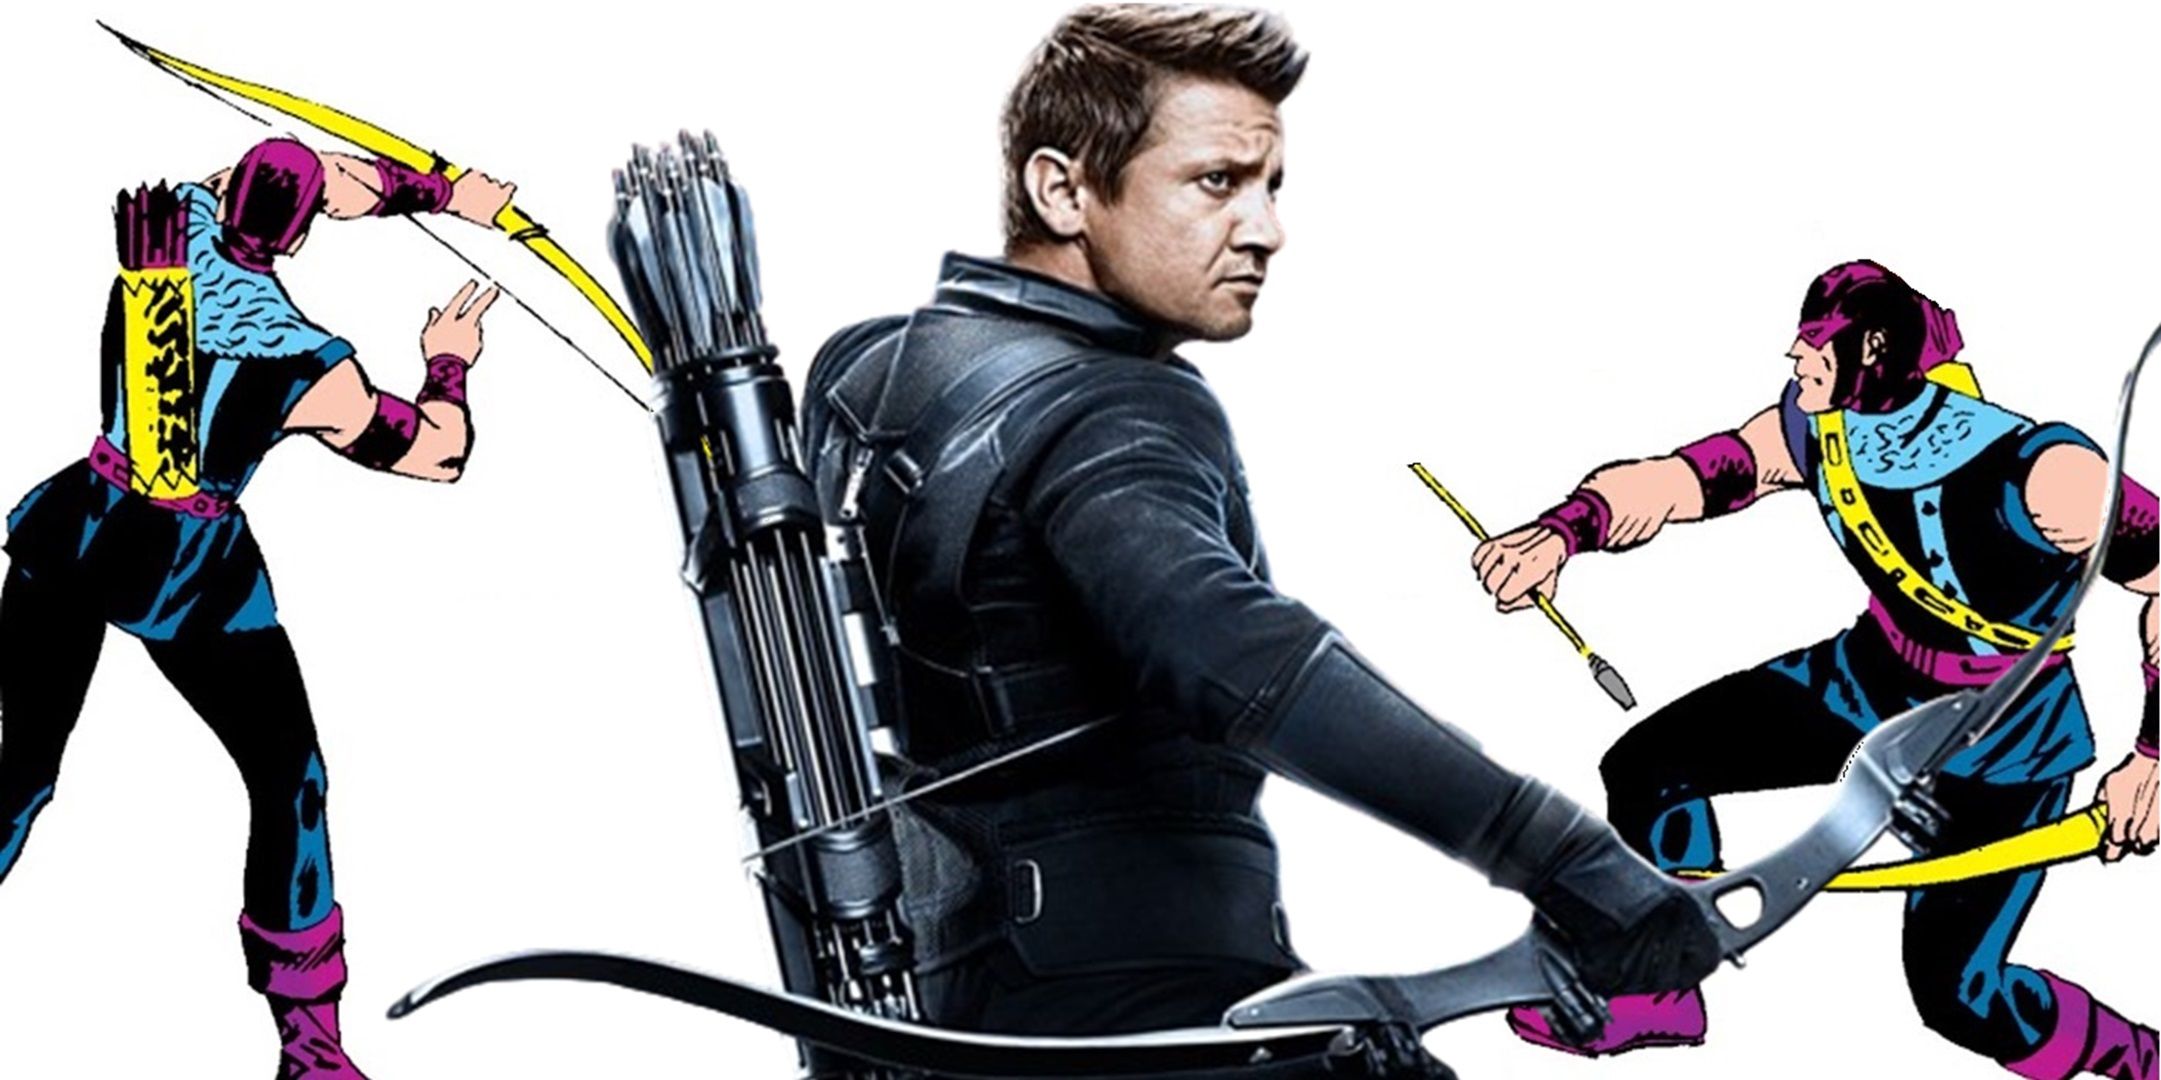 60 years ago, Hawkeye hit the mark with his comic book debut